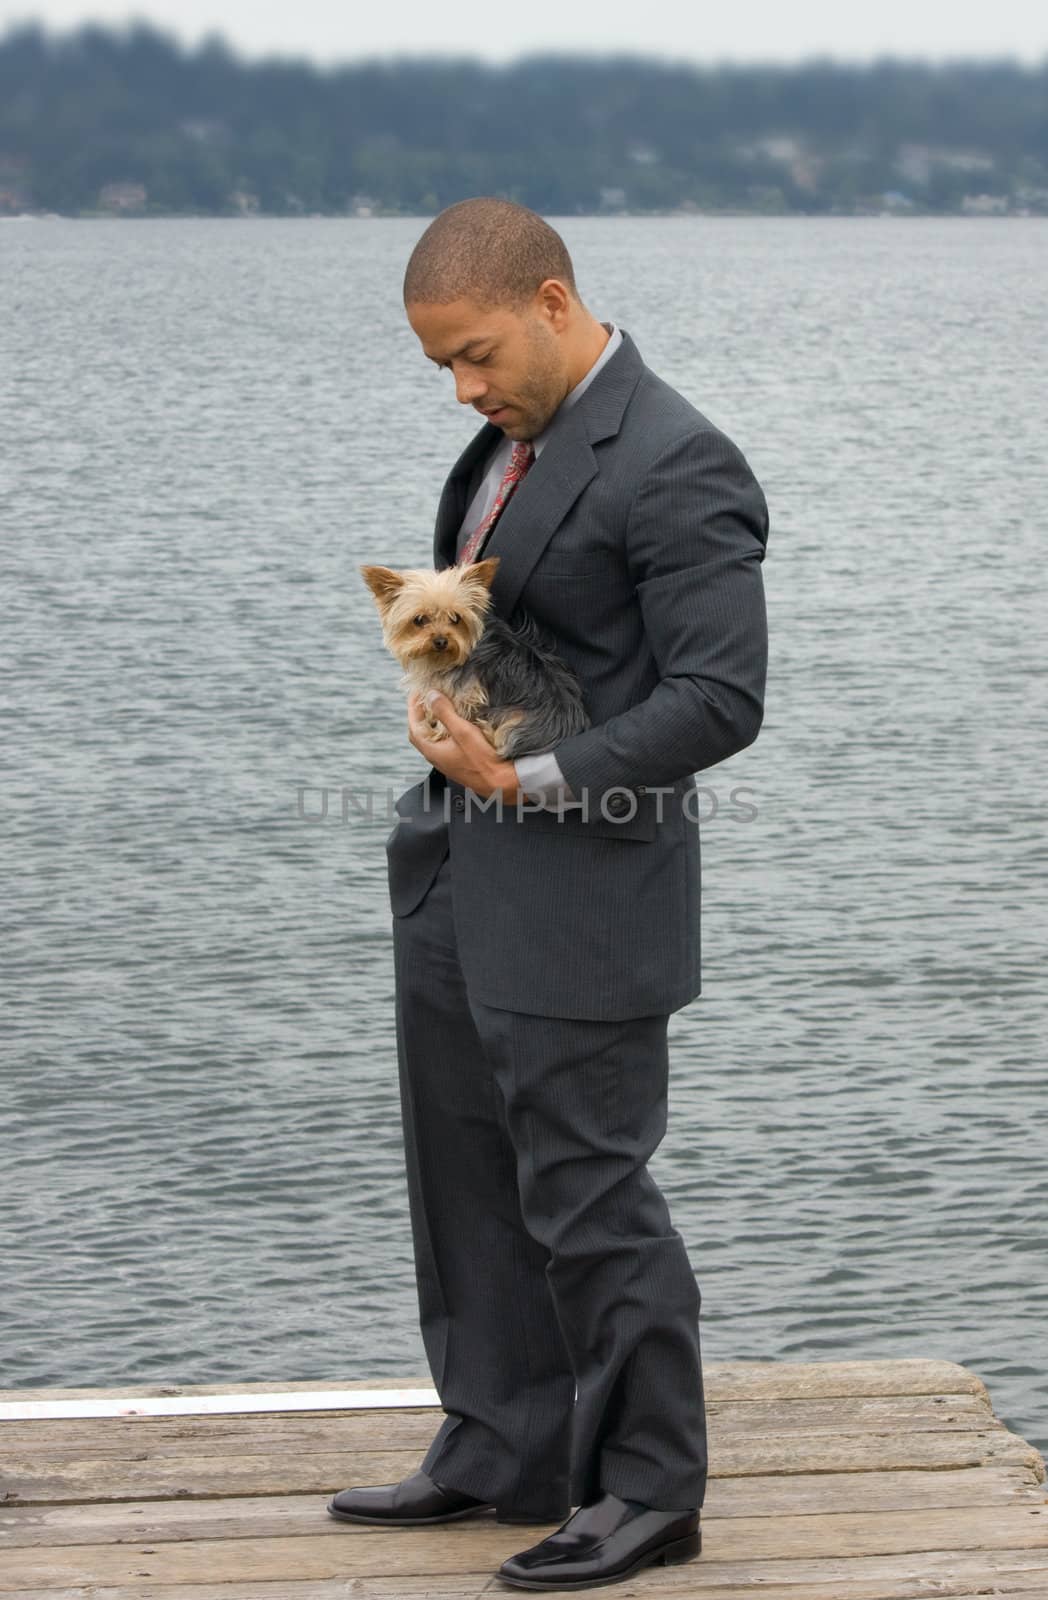 Ethnic Business Man with his Yorkshire Terrier Dog standing on a pier next to the lake.